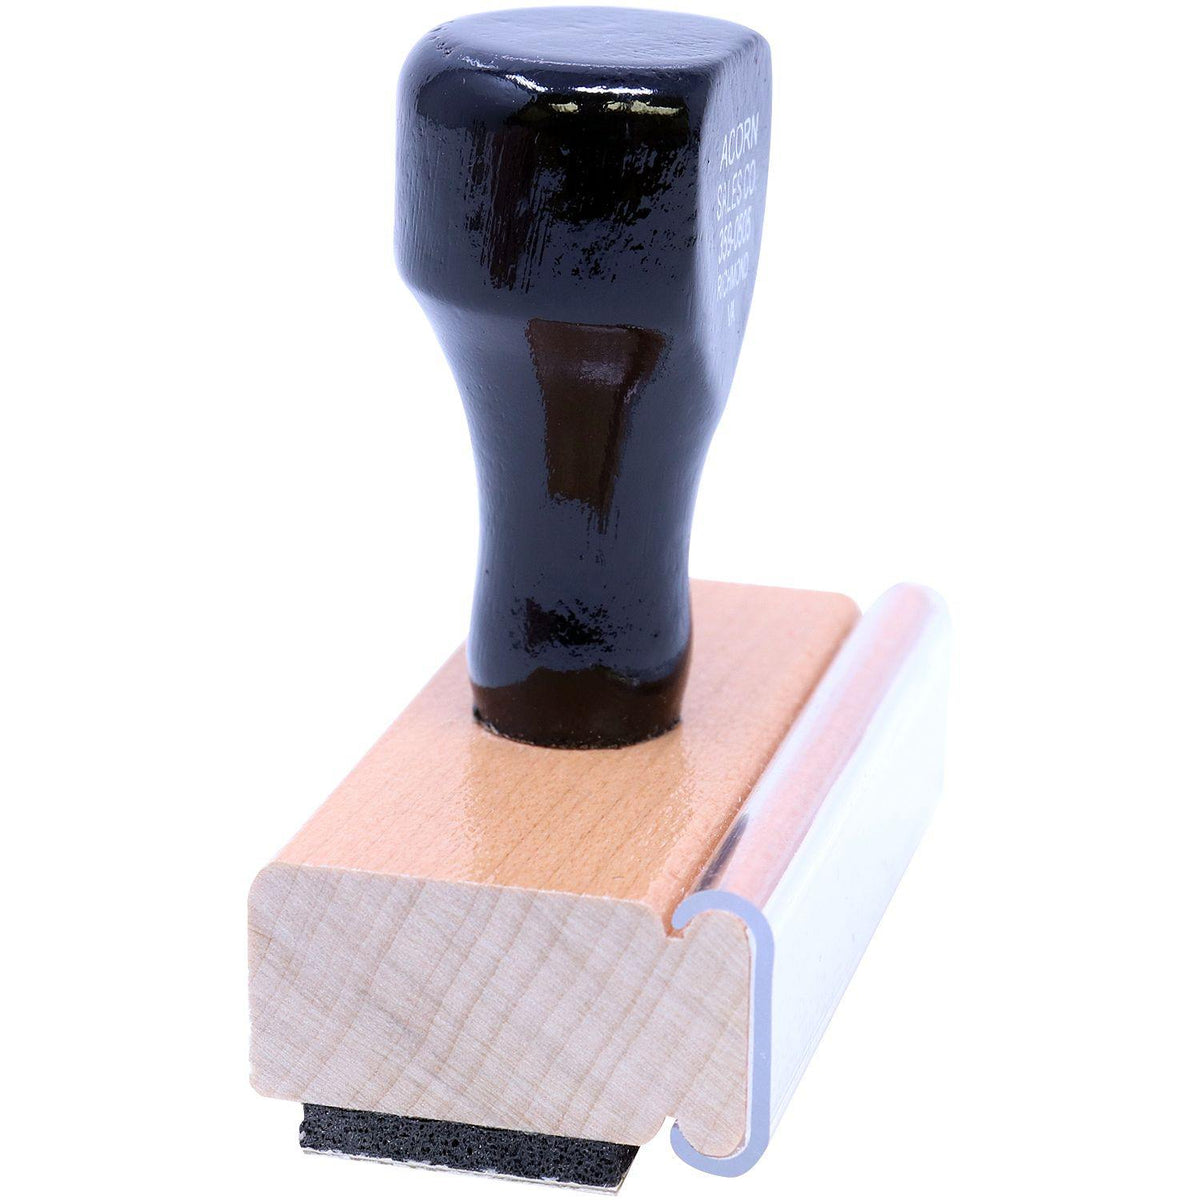 Side View of Large Confidential Rubber Stamp at an Angle